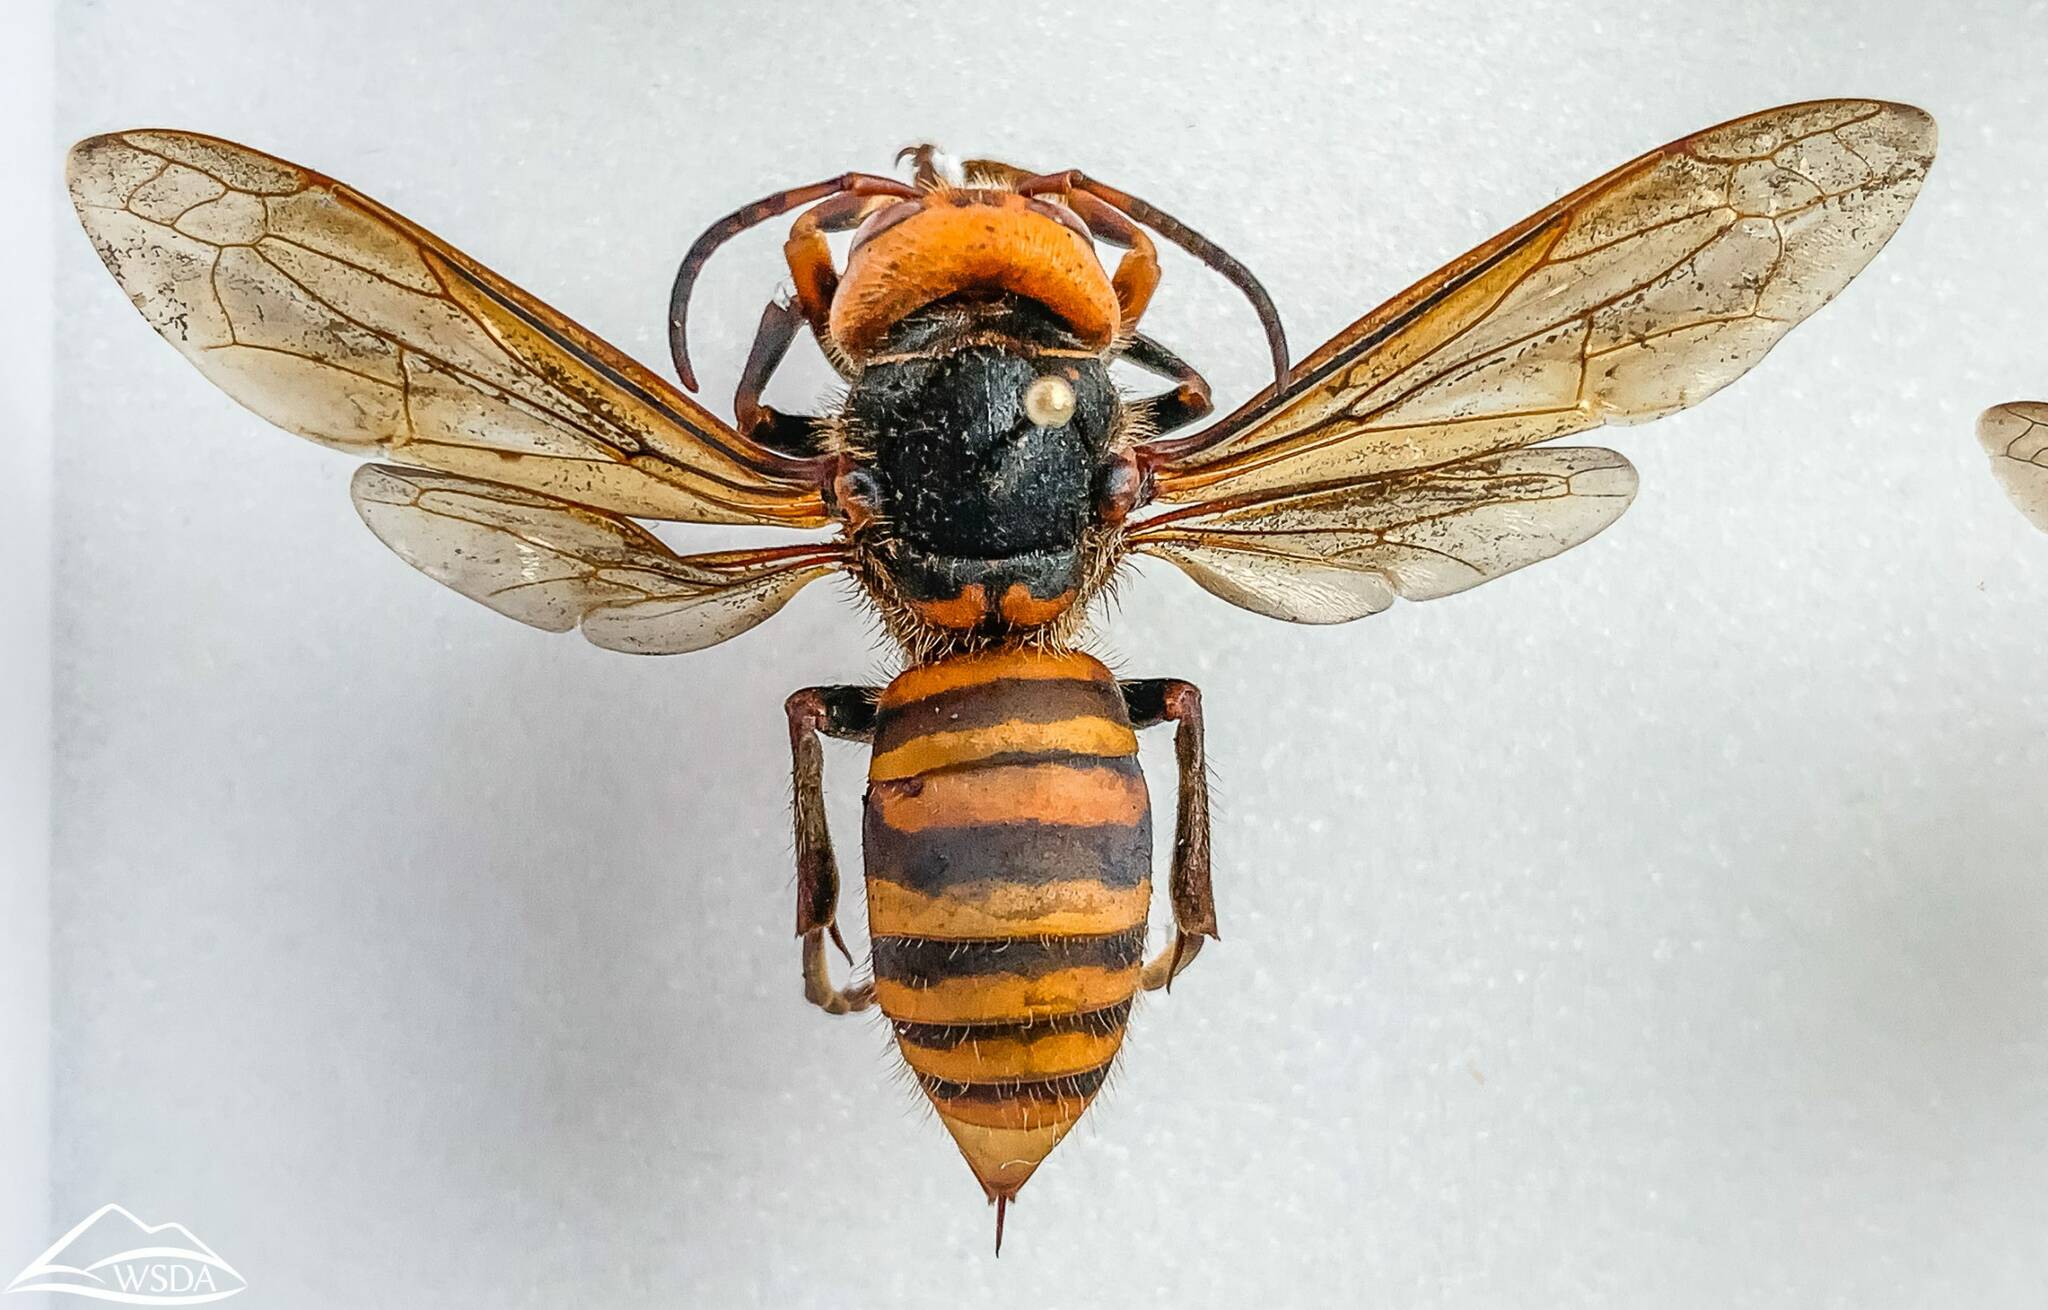 Photo courtesy of Washington State Department of Agriculture
Asian Giant Hornet.